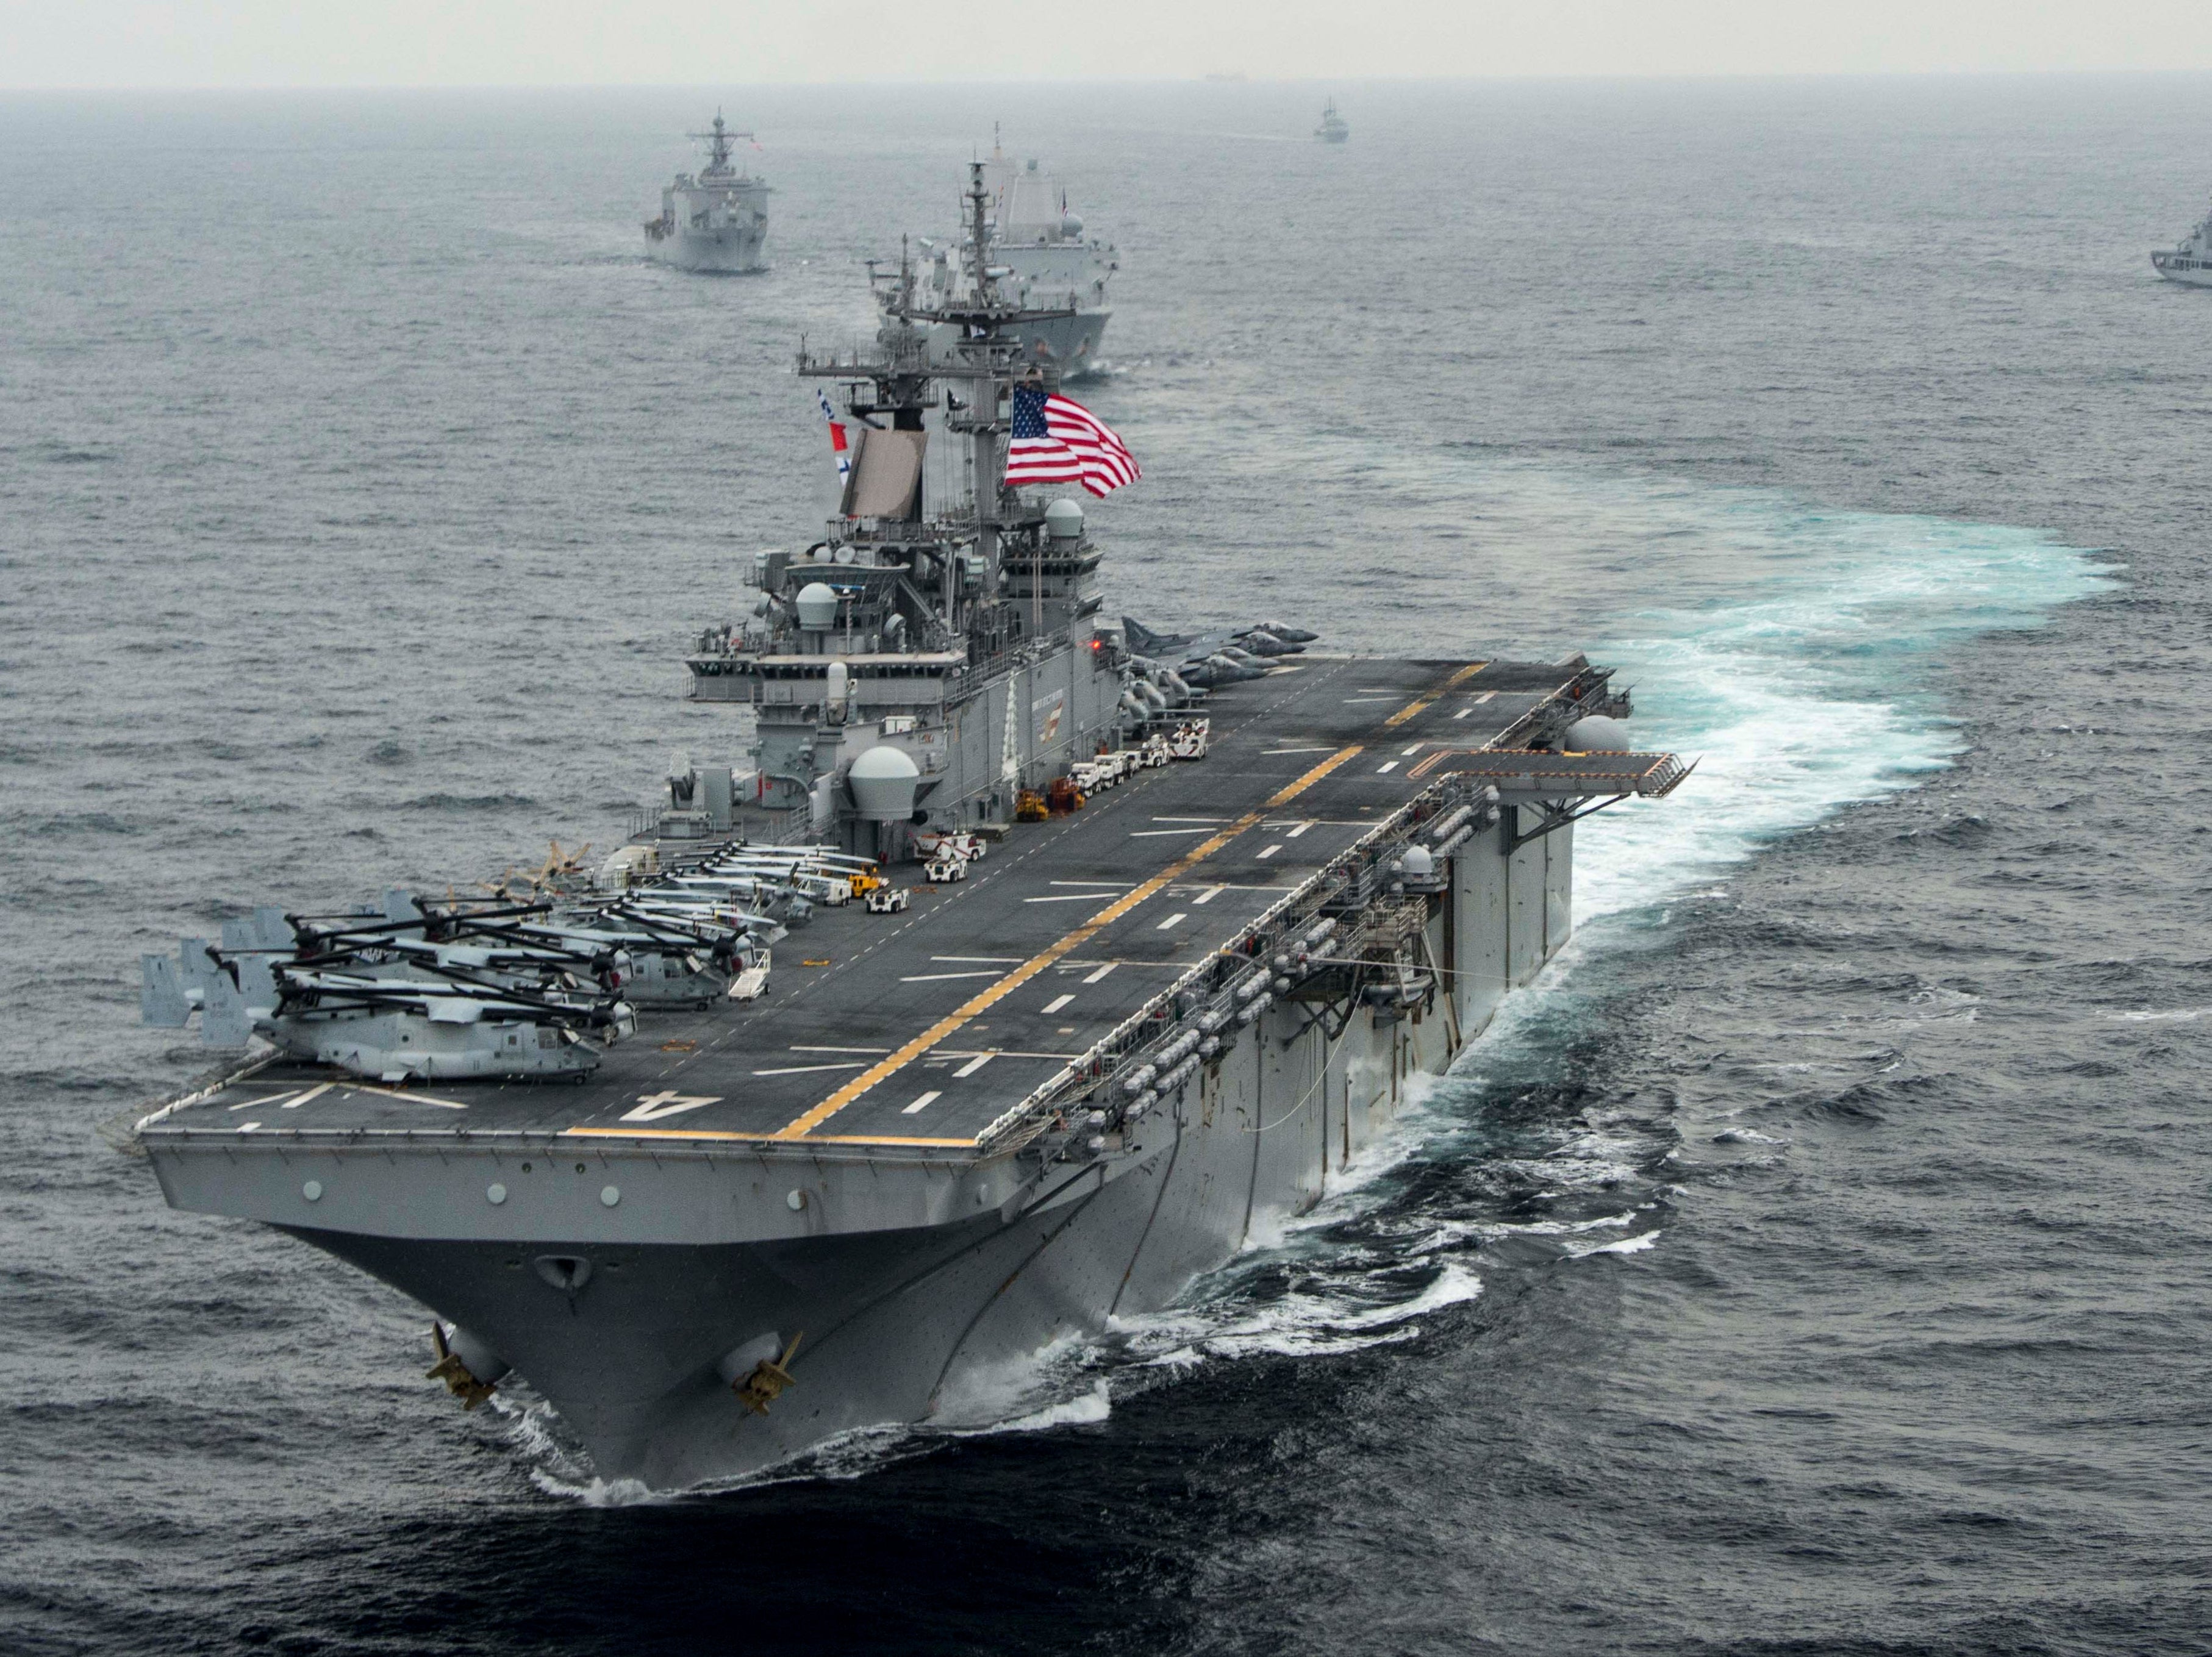 In this handout photo provided by the US Navy, the amphibious assault ship USS Boxer (LHD 4) transits the East Sea in 2016